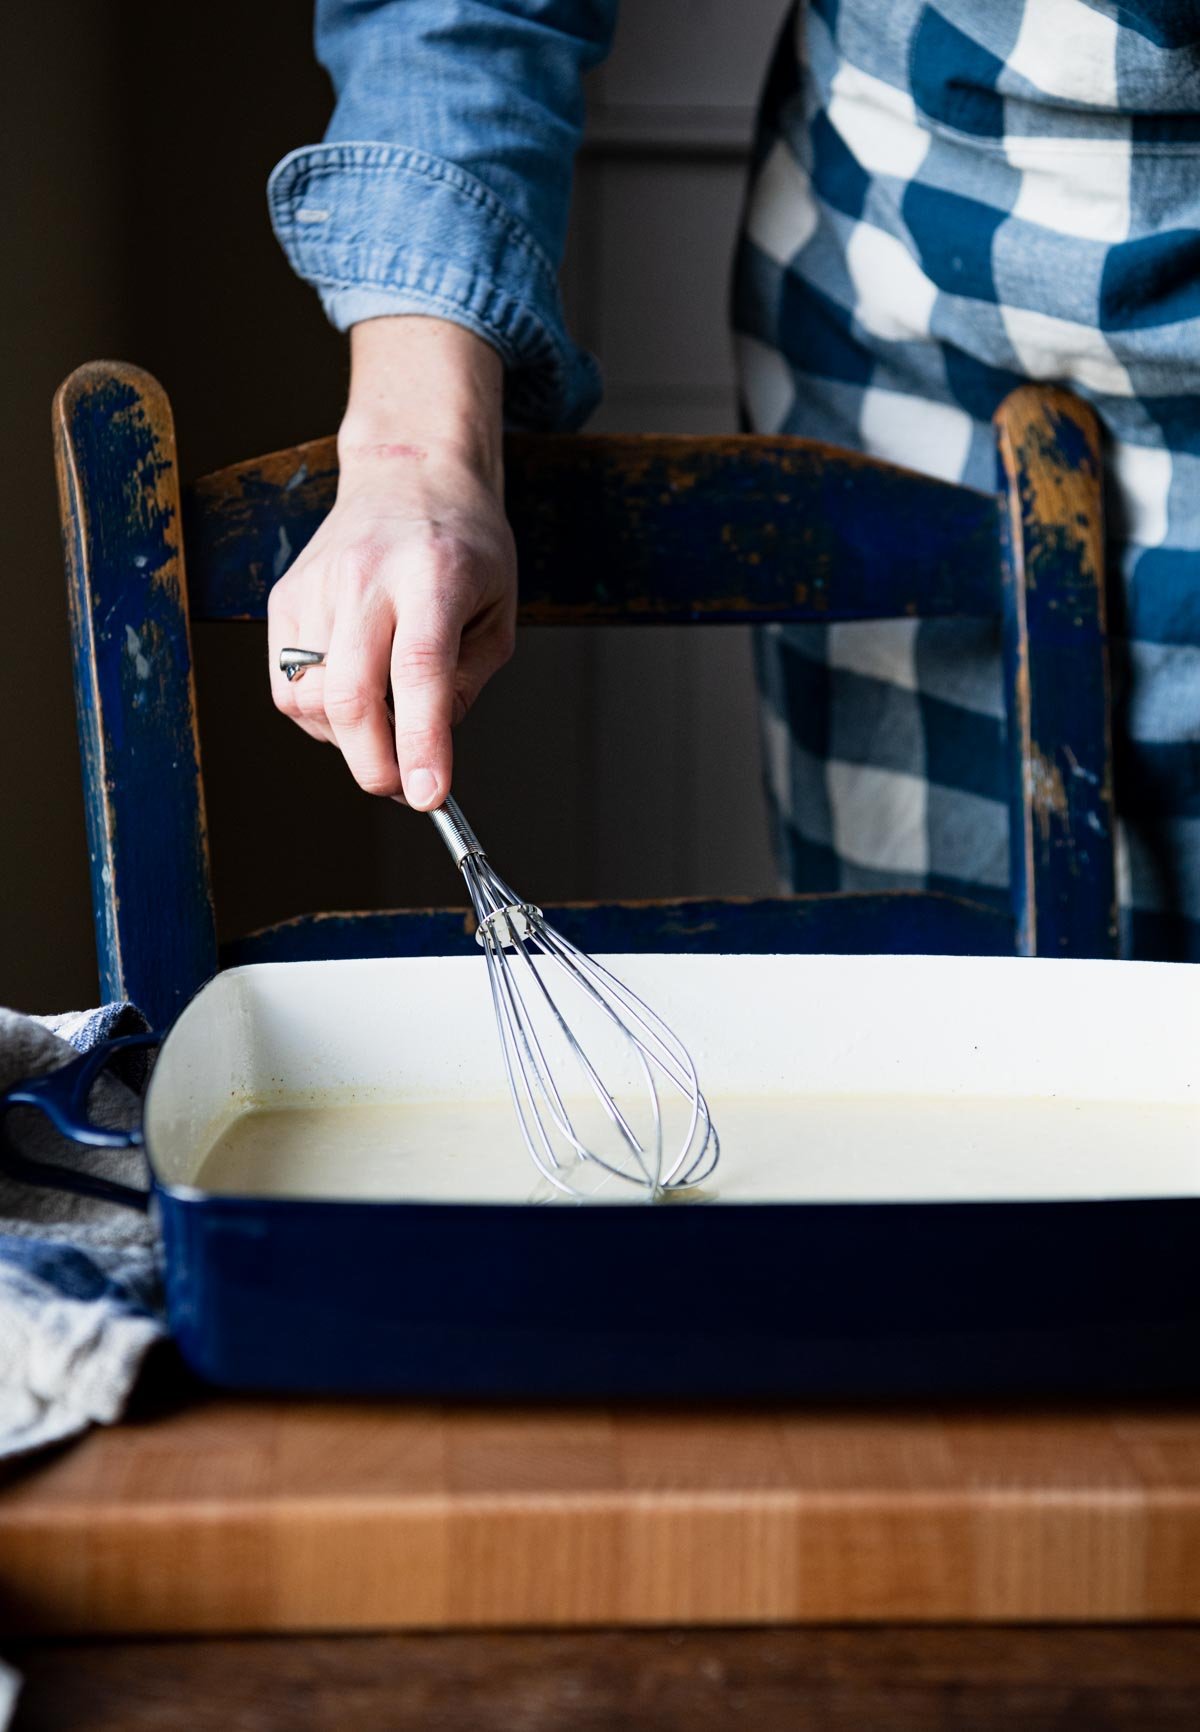 Whisking together sauce in a baking dish.